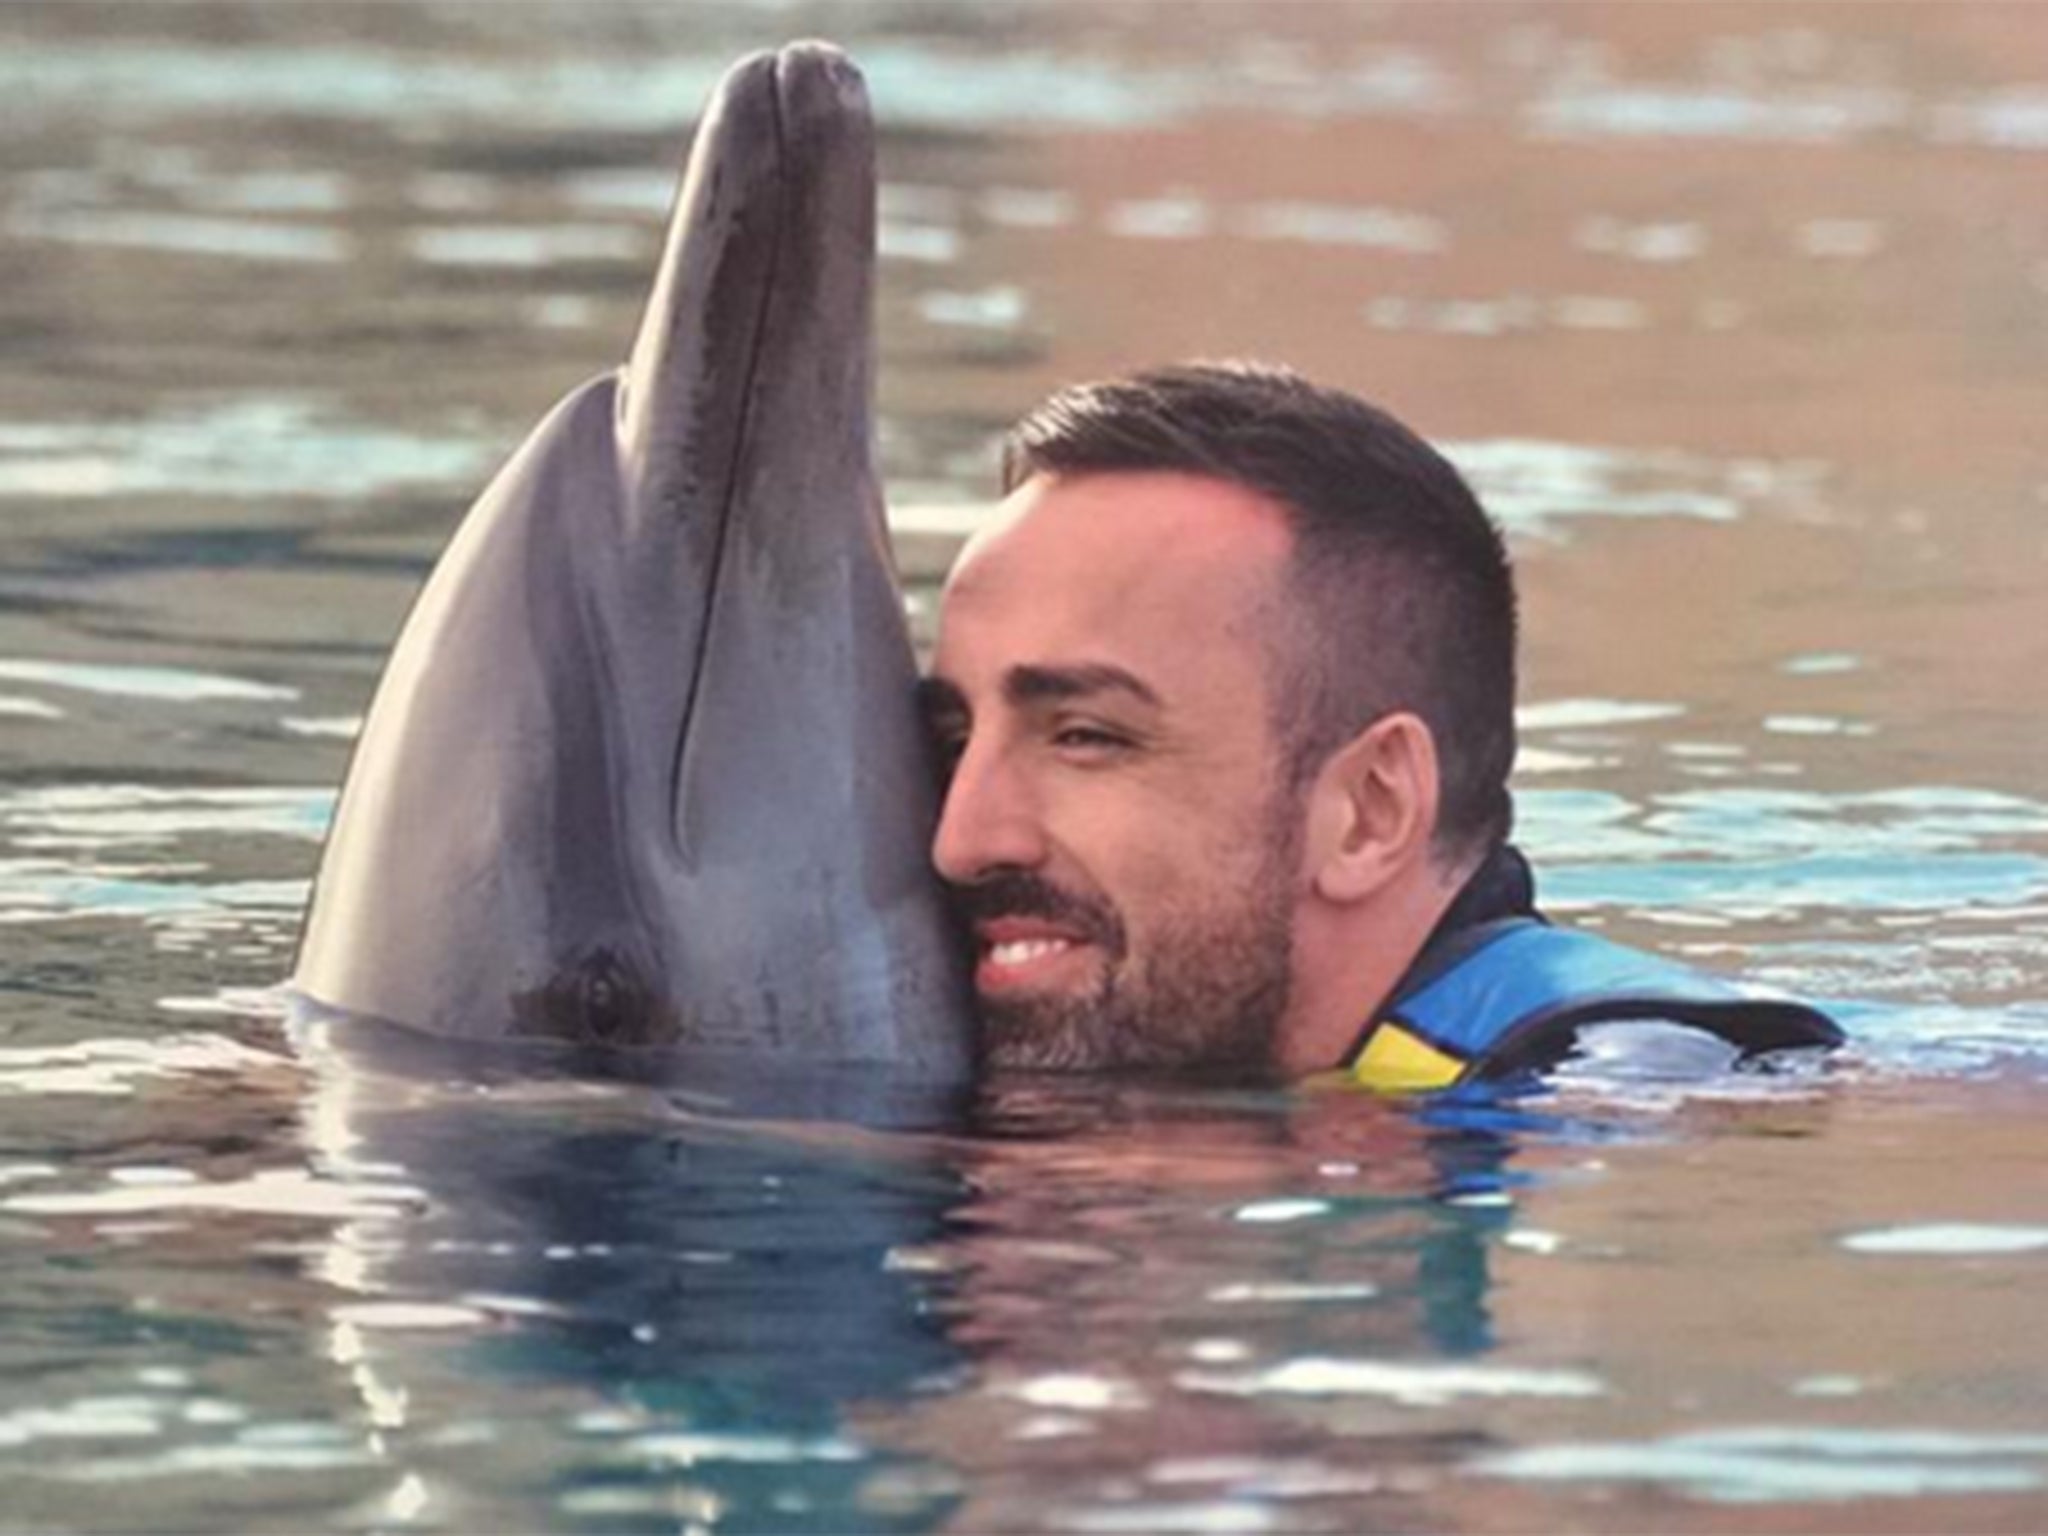 Jose Enrique swims with dolphins